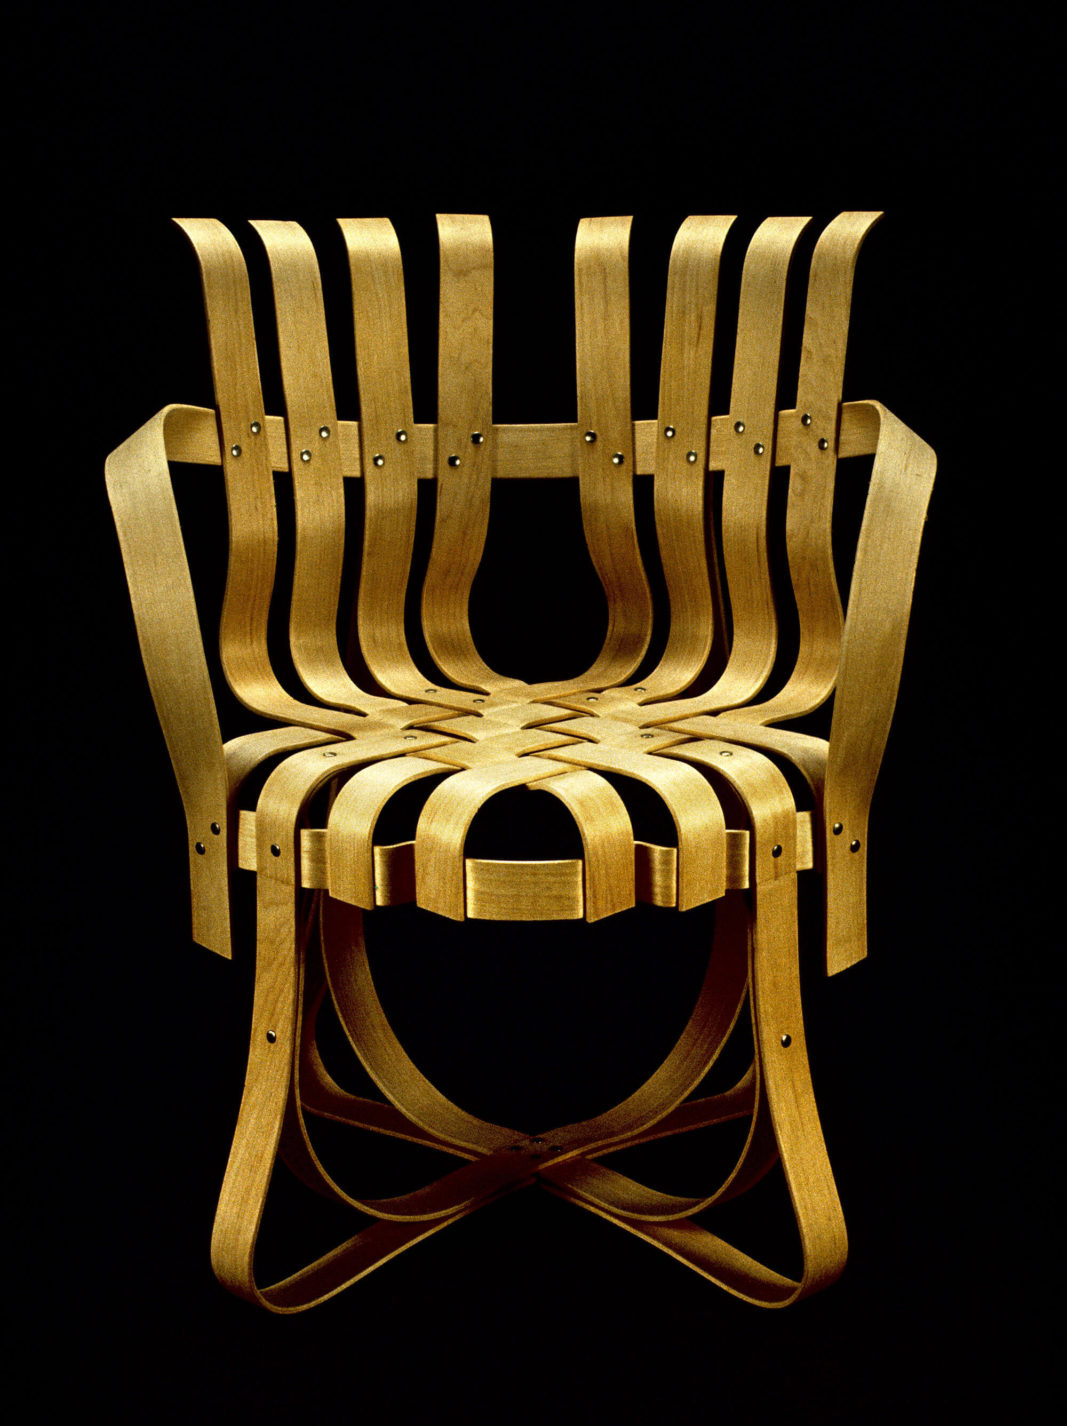 Armchair composed of numerous plywood strips bent to form curving arms, back, and legs, and woven together to form the seat.